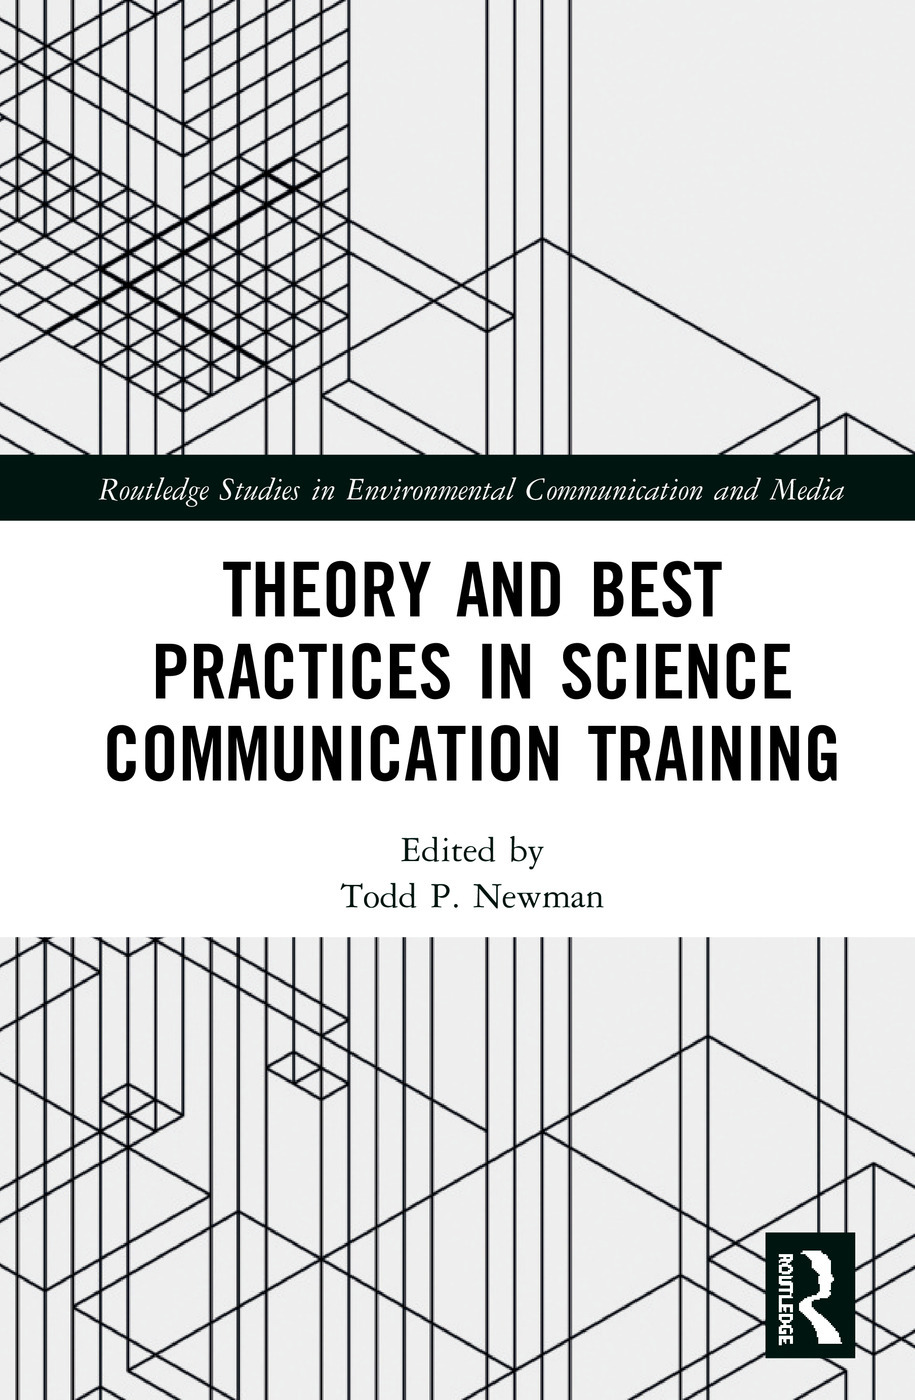 Newman's book, "Theory and Best Practices in Science Communication Training" cover